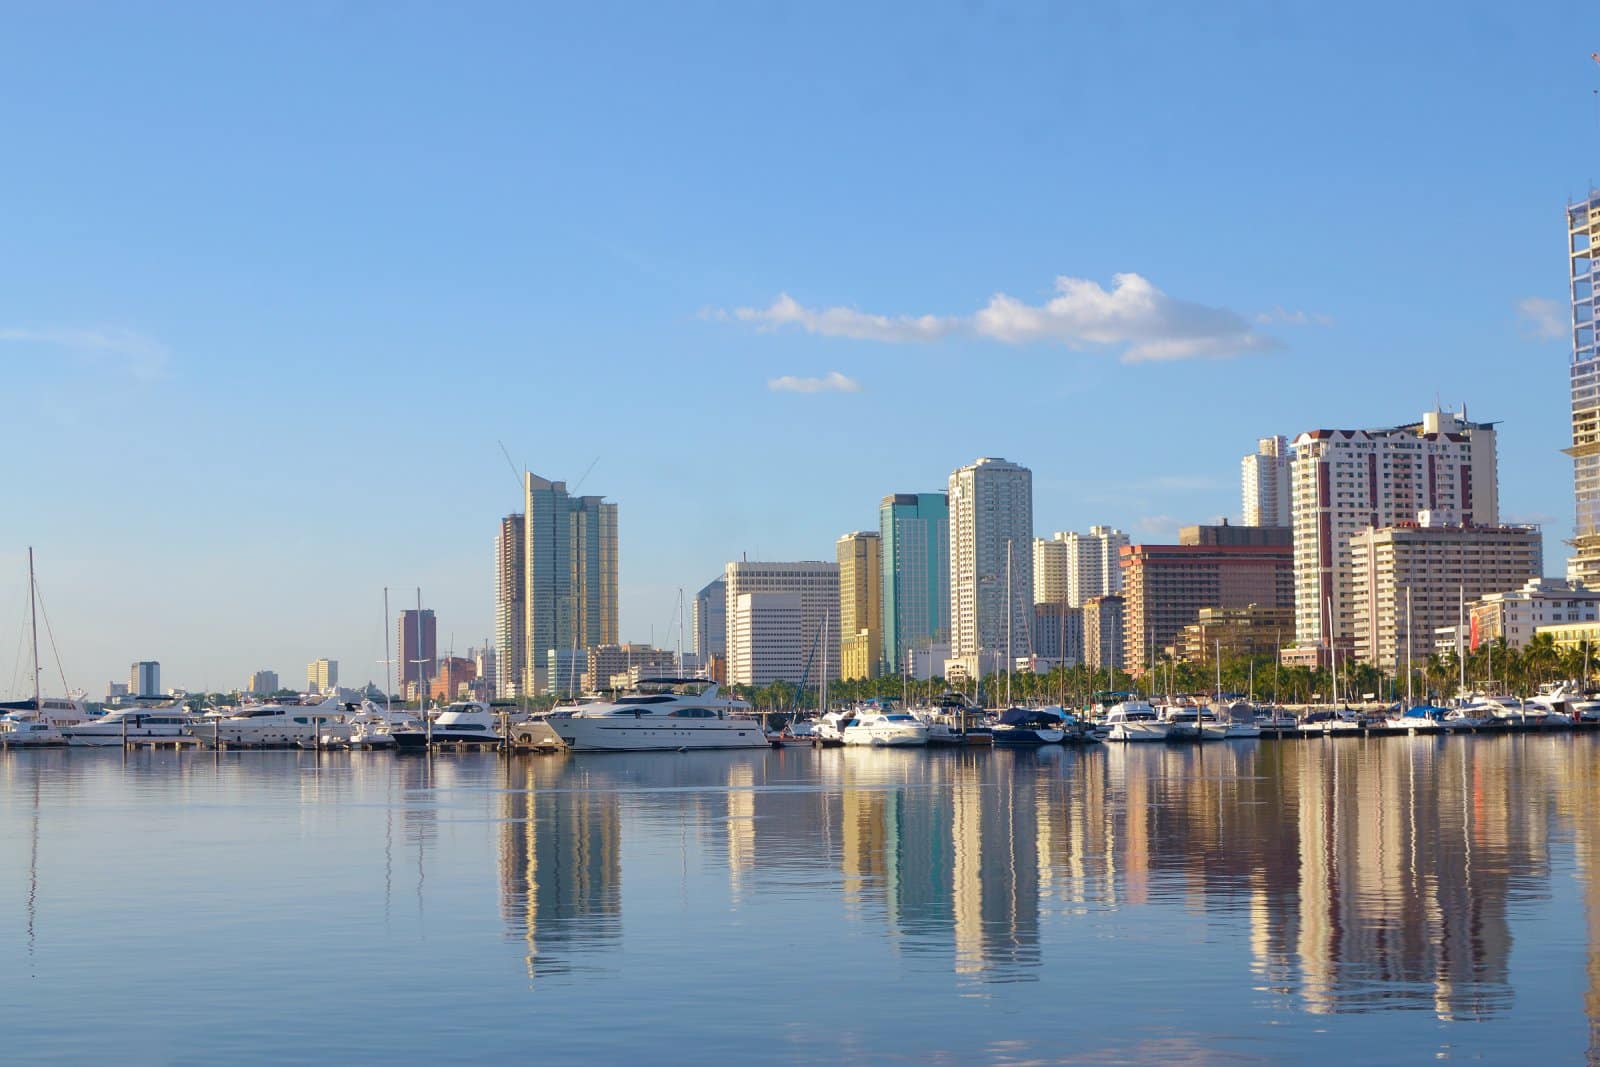 <p class="wp-caption-text">Image Credit: Shutterstock / Jomar Aplaon</p>  <p><span>Roxas Boulevard is a historic waterfront promenade stretching approximately 7.6 kilometers along the shores of Manila Bay. Named after President Manuel Roxas, the boulevard is one of the city’s major arteries, connecting the cultural and entertainment district of Manila with the cities of Pasay and Parañaque to the south. Known for its picturesque sunsets and coconut tree-lined sidewalks, Roxas Boulevard serves as a scenic backdrop for leisure and commerce, embodying the vibrant spirit of the Philippine capital.</span></p> <p><span>A mix of old and new structures, including government offices, embassies, hotels, commercial establishments, and cultural venues flanks the boulevard. Notable landmarks along Roxas Boulevard include the Cultural Center of the Philippines Complex, which houses various arts and performance venues; the historic Manila Hotel; and Rizal Park, one of the largest urban parks in Asia. The area is also popular for outdoor activities, such as jogging, biking, and leisurely walks, especially during the early morning and late afternoon when the Manila Bay sunset creates a breathtaking view.</span></p> <p><span>Over the years, Roxas Boulevard has undergone several redevelopment projects to enhance its role as a key urban space that supports cultural, recreational, and economic activities. Efforts to preserve the beauty of Manila Bay and improve the boulevard’s infrastructure reflect the city’s commitment to maintaining its historical significance while adapting to modern urban demands.</span></p> <p><b>Insider’s Tip: </b><span>Arrive early to secure a spot along the Baywalk for the best sunset views. It’s a popular spot, especially on clear days.</span></p>